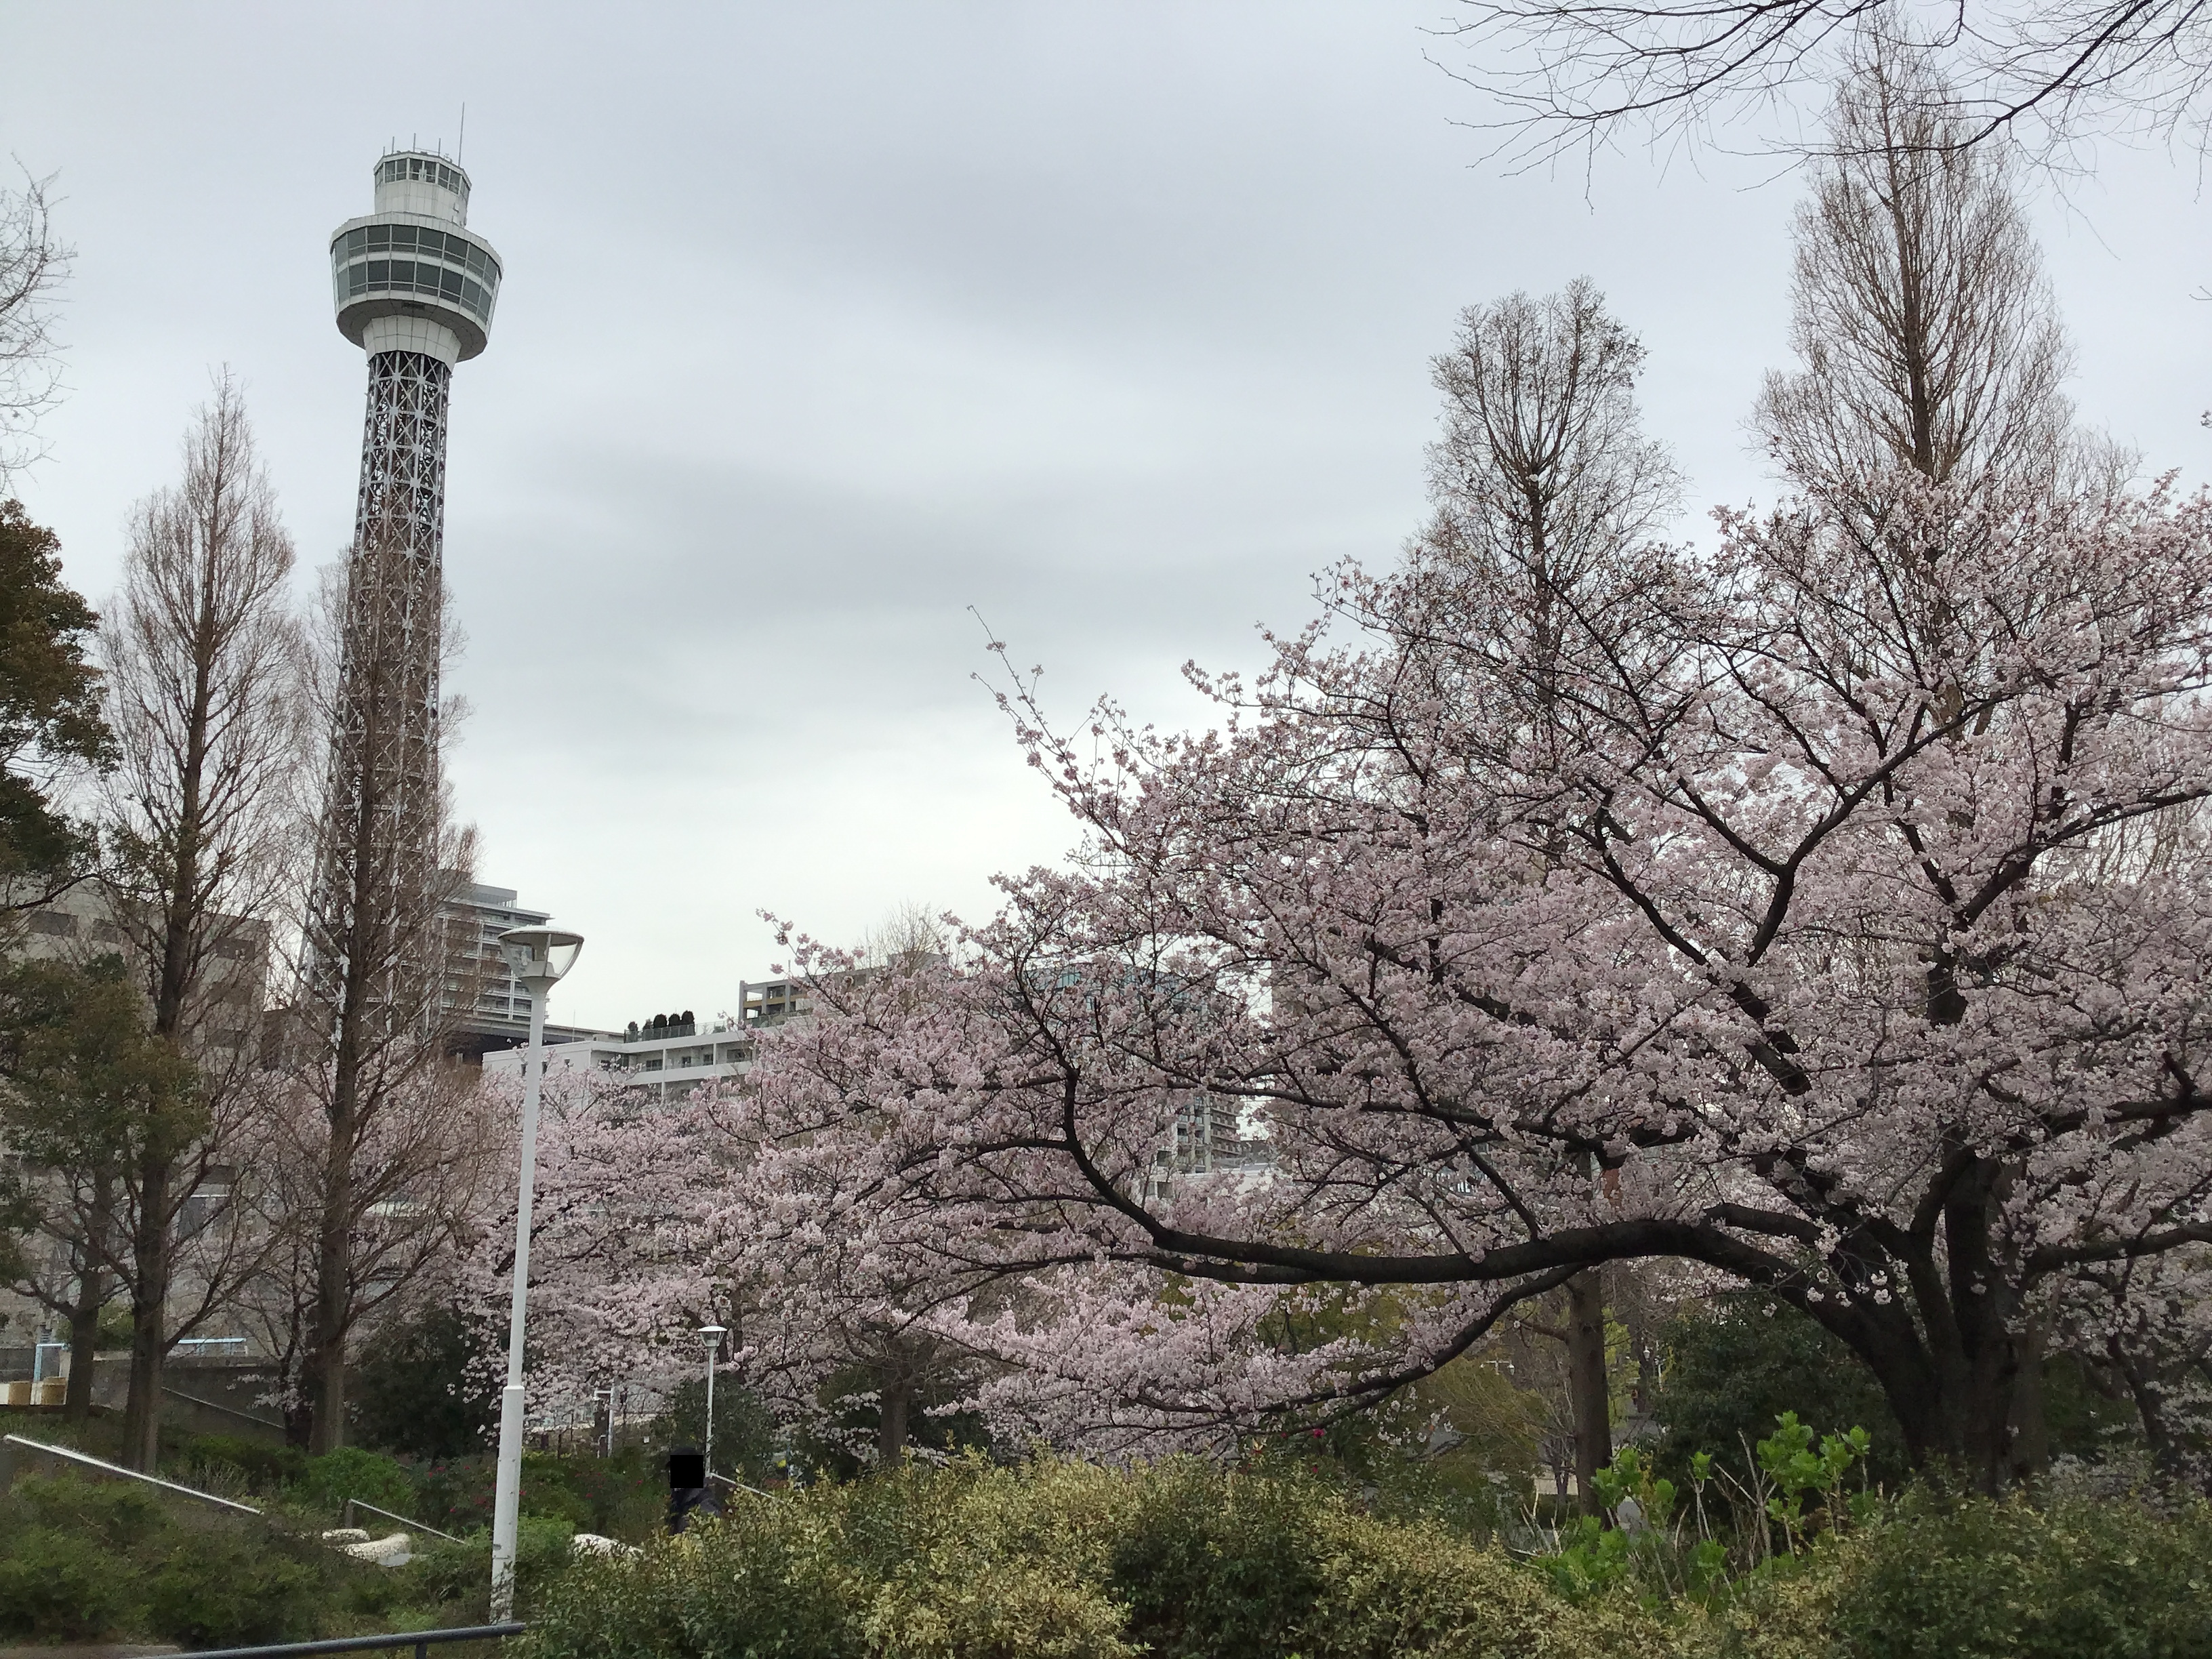 A portion of the Yokohama skyling with a cherry blossom tree in the foreground